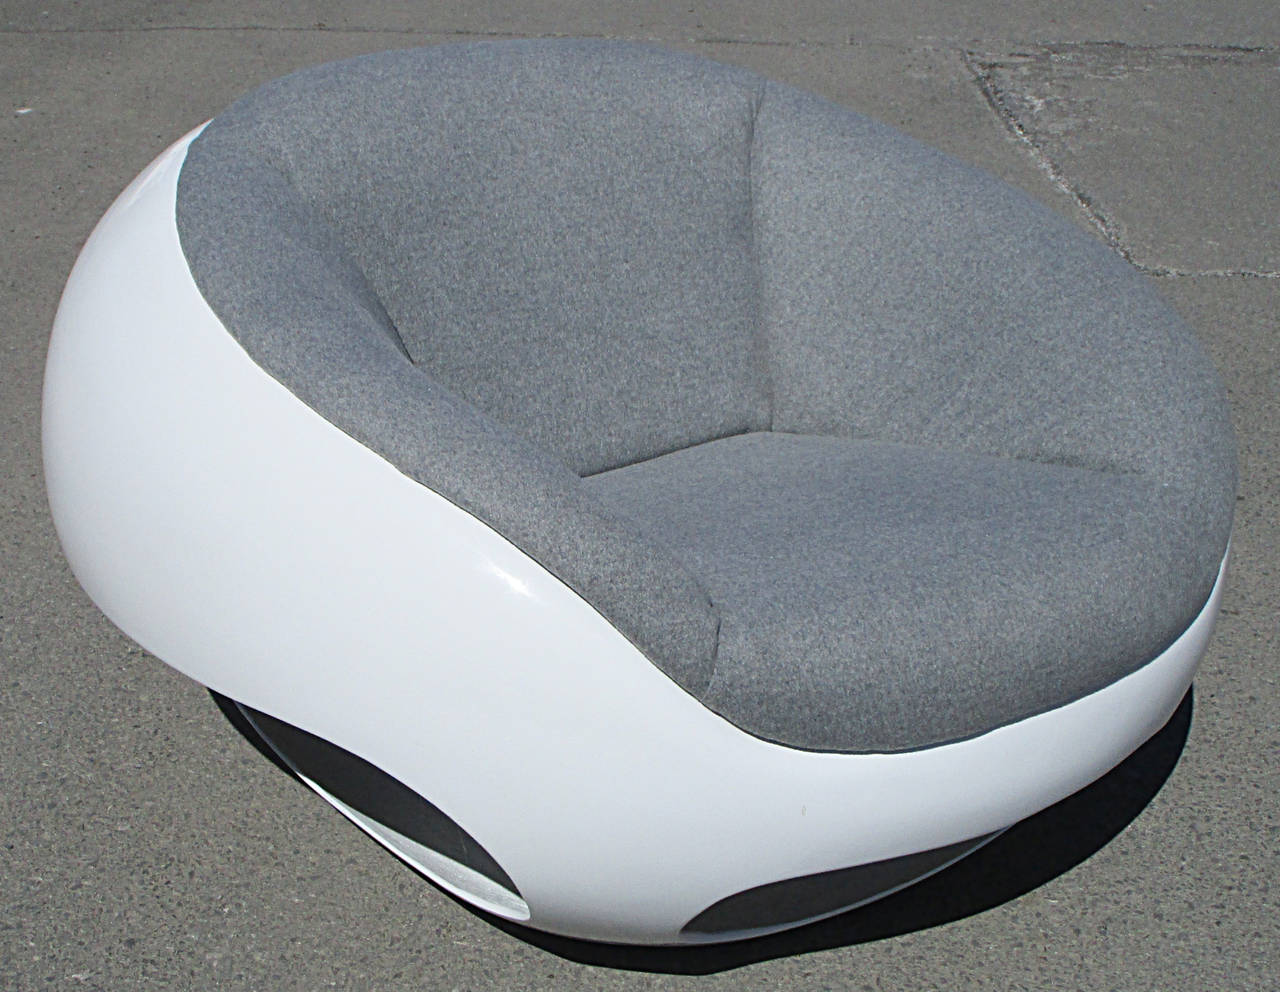 Fantastic pod chair by Mario Sabot. Fiberglass frame. Newly reupholstered in a heather gray wool flannel.